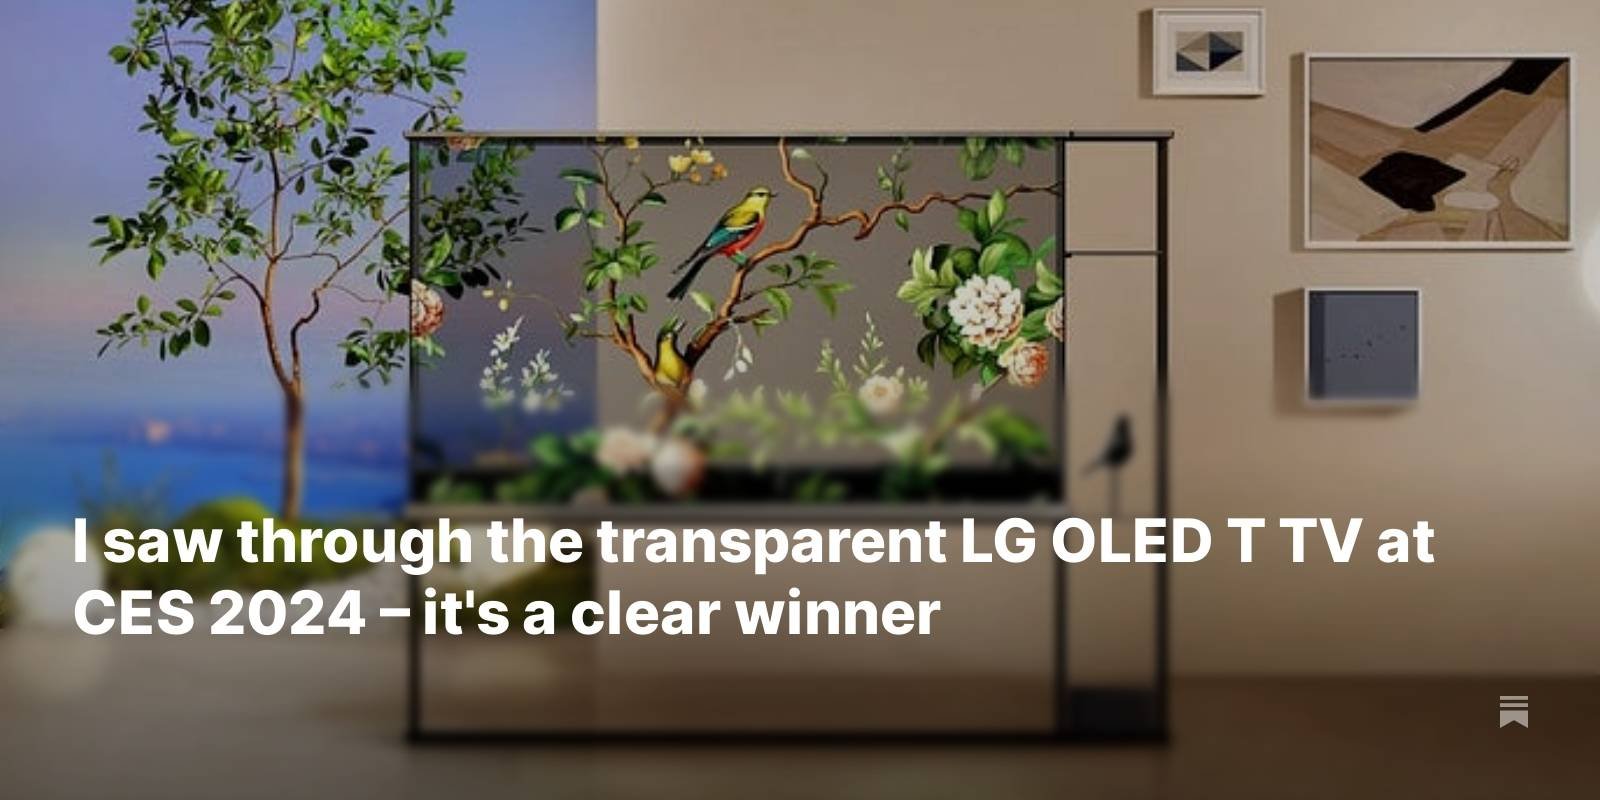 LG's wireless transparent OLED TV debuts at CES 2024